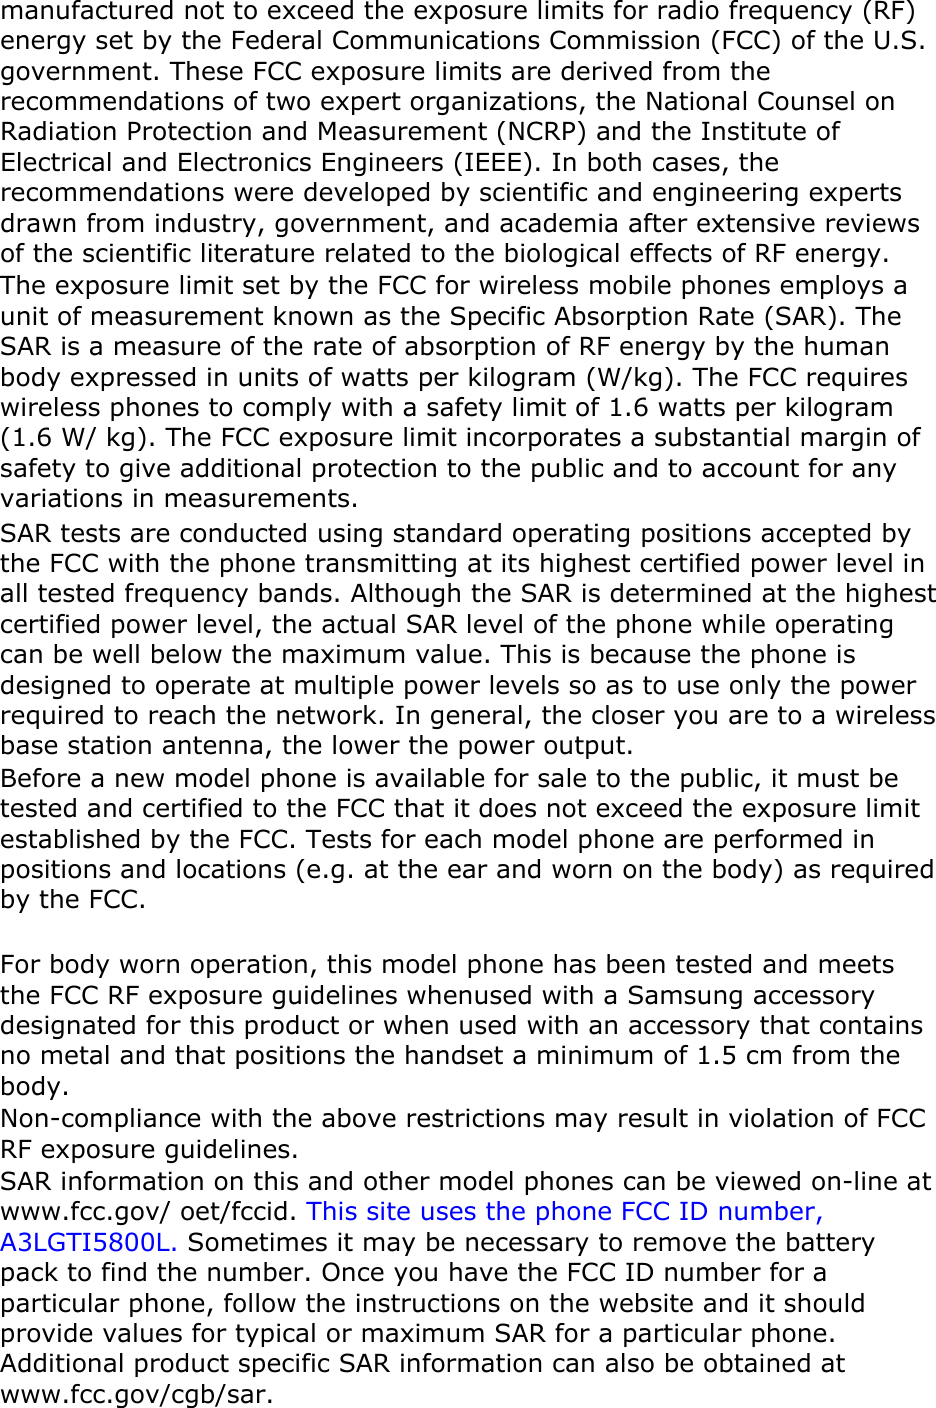 manufactured not to exceed the exposure limits for radio frequency (RF) energy set by the Federal Communications Commission (FCC) of the U.S. government. These FCC exposure limits are derived from the recommendations of two expert organizations, the National Counsel on Radiation Protection and Measurement (NCRP) and the Institute of Electrical and Electronics Engineers (IEEE). In both cases, the recommendations were developed by scientific and engineering experts drawn from industry, government, and academia after extensive reviews of the scientific literature related to the biological effects of RF energy. The exposure limit set by the FCC for wireless mobile phones employs a unit of measurement known as the Specific Absorption Rate (SAR). The SAR is a measure of the rate of absorption of RF energy by the human body expressed in units of watts per kilogram (W/kg). The FCC requires wireless phones to comply with a safety limit of 1.6 watts per kilogram (1.6 W/ kg). The FCC exposure limit incorporates a substantial margin of safety to give additional protection to the public and to account for any variations in measurements. SAR tests are conducted using standard operating positions accepted by the FCC with the phone transmitting at its highest certified power level in all tested frequency bands. Although the SAR is determined at the highest certified power level, the actual SAR level of the phone while operating can be well below the maximum value. This is because the phone is designed to operate at multiple power levels so as to use only the power required to reach the network. In general, the closer you are to a wireless base station antenna, the lower the power output. Before a new model phone is available for sale to the public, it must be tested and certified to the FCC that it does not exceed the exposure limit established by the FCC. Tests for each model phone are performed in positions and locations (e.g. at the ear and worn on the body) as required by the FCC.      For body worn operation, this model phone has been tested and meets the FCC RF exposure guidelines whenused with a Samsung accessory designated for this product or when used with an accessory that contains no metal and that positions the handset a minimum of 1.5 cm from the body.  Non-compliance with the above restrictions may result in violation of FCC RF exposure guidelines. SAR information on this and other model phones can be viewed on-line at www.fcc.gov/ oet/fccid. This site uses the phone FCC ID number, A3LGTI5800L. Sometimes it may be necessary to remove the battery pack to find the number. Once you have the FCC ID number for a particular phone, follow the instructions on the website and it should provide values for typical or maximum SAR for a particular phone. Additional product specific SAR information can also be obtained at www.fcc.gov/cgb/sar. 